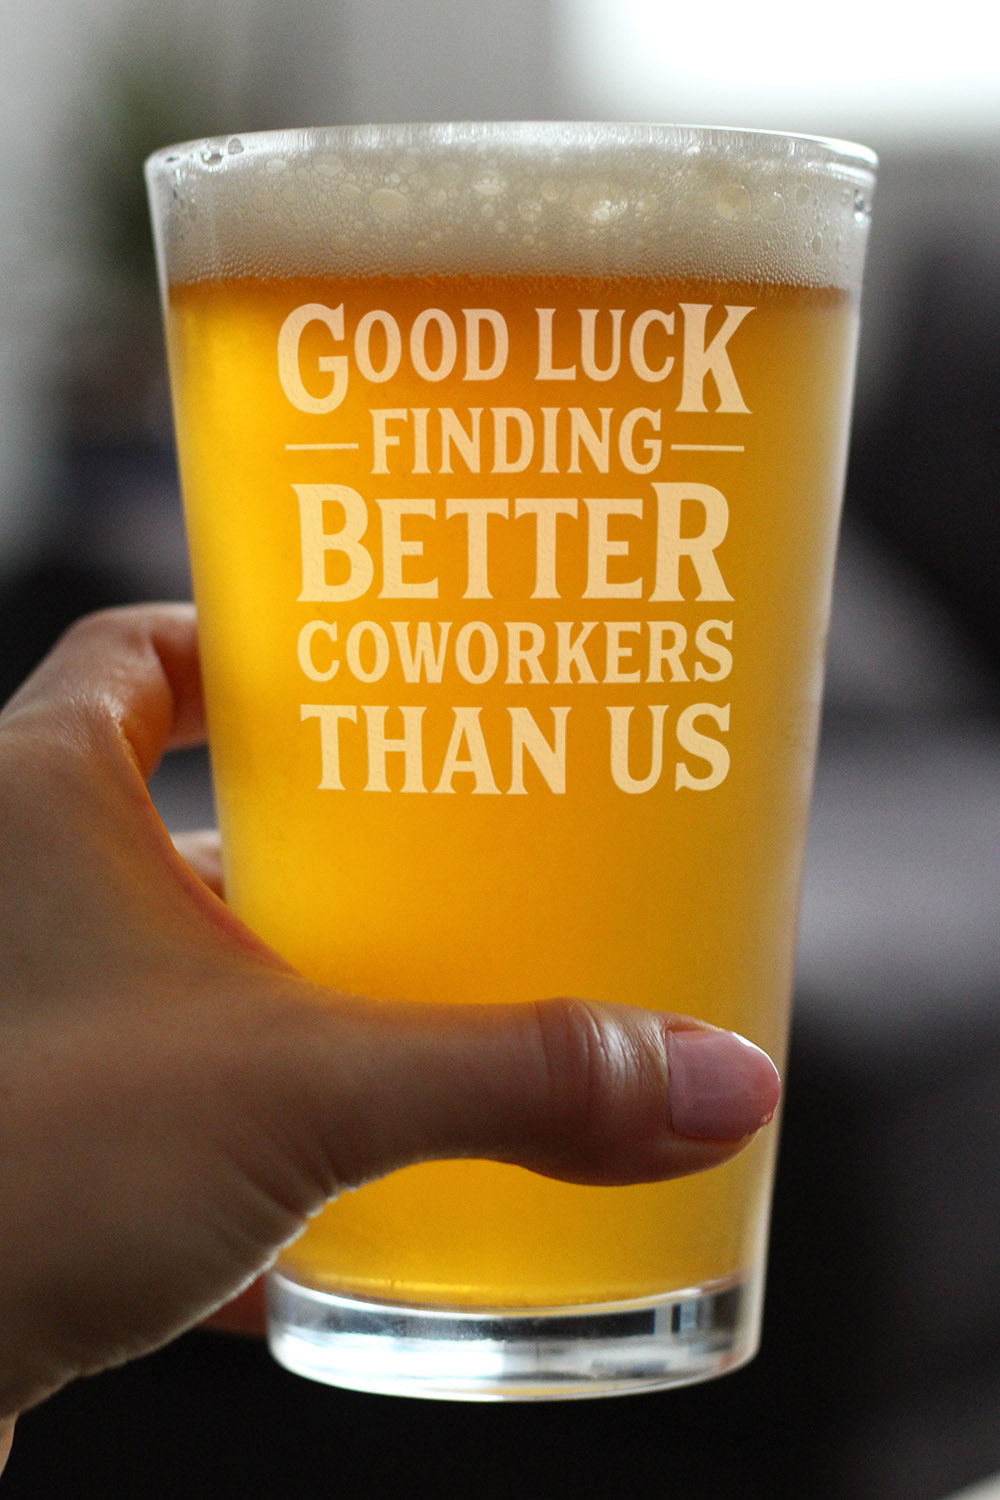 Good Luck Finding Better Coworkers Than Us - Pint Glass for Beer - Funny Beer Gift for Coworker - Fun Office Gifts